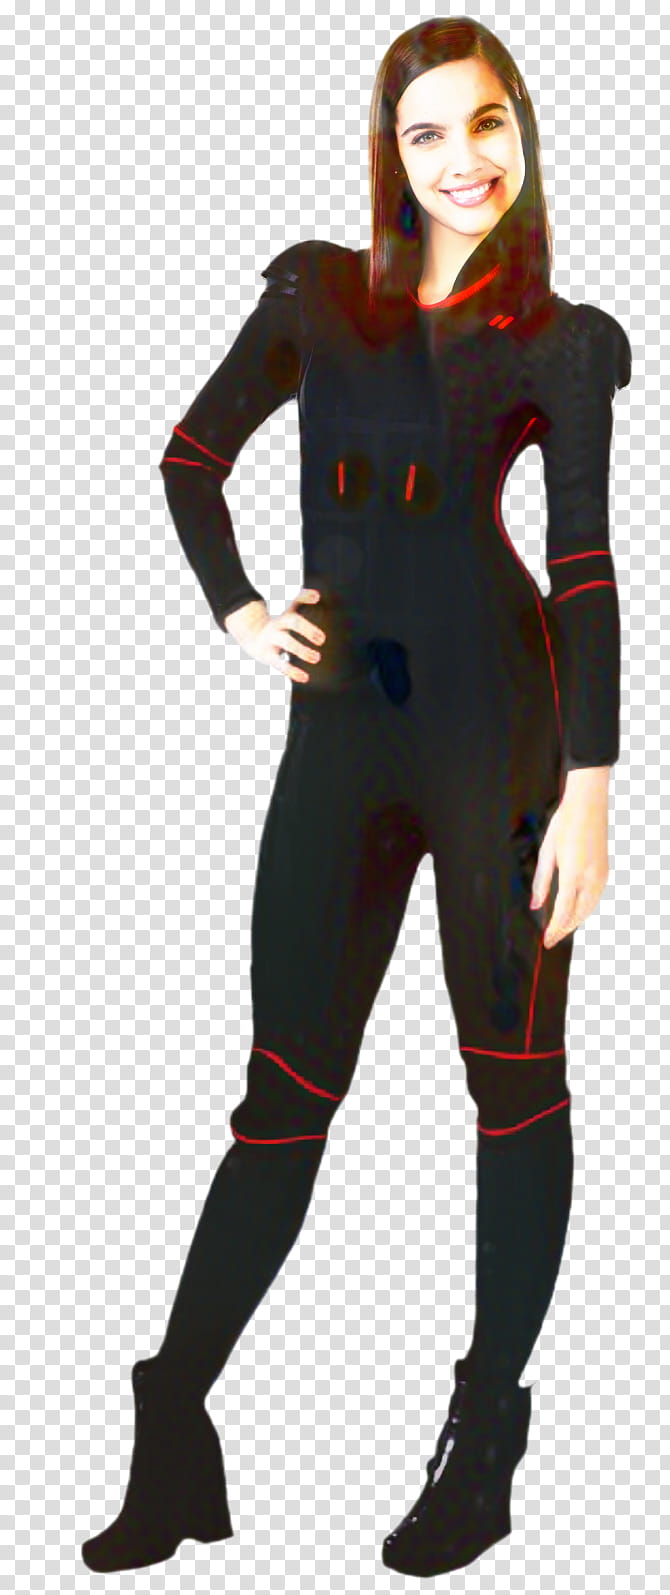 Yo Soy Franky Wetsuit, Tamara Franco, Actor, Shooter Game, Firstperson Shooter, Sniper, Android, Personal Protective Equipment transparent background PNG clipart